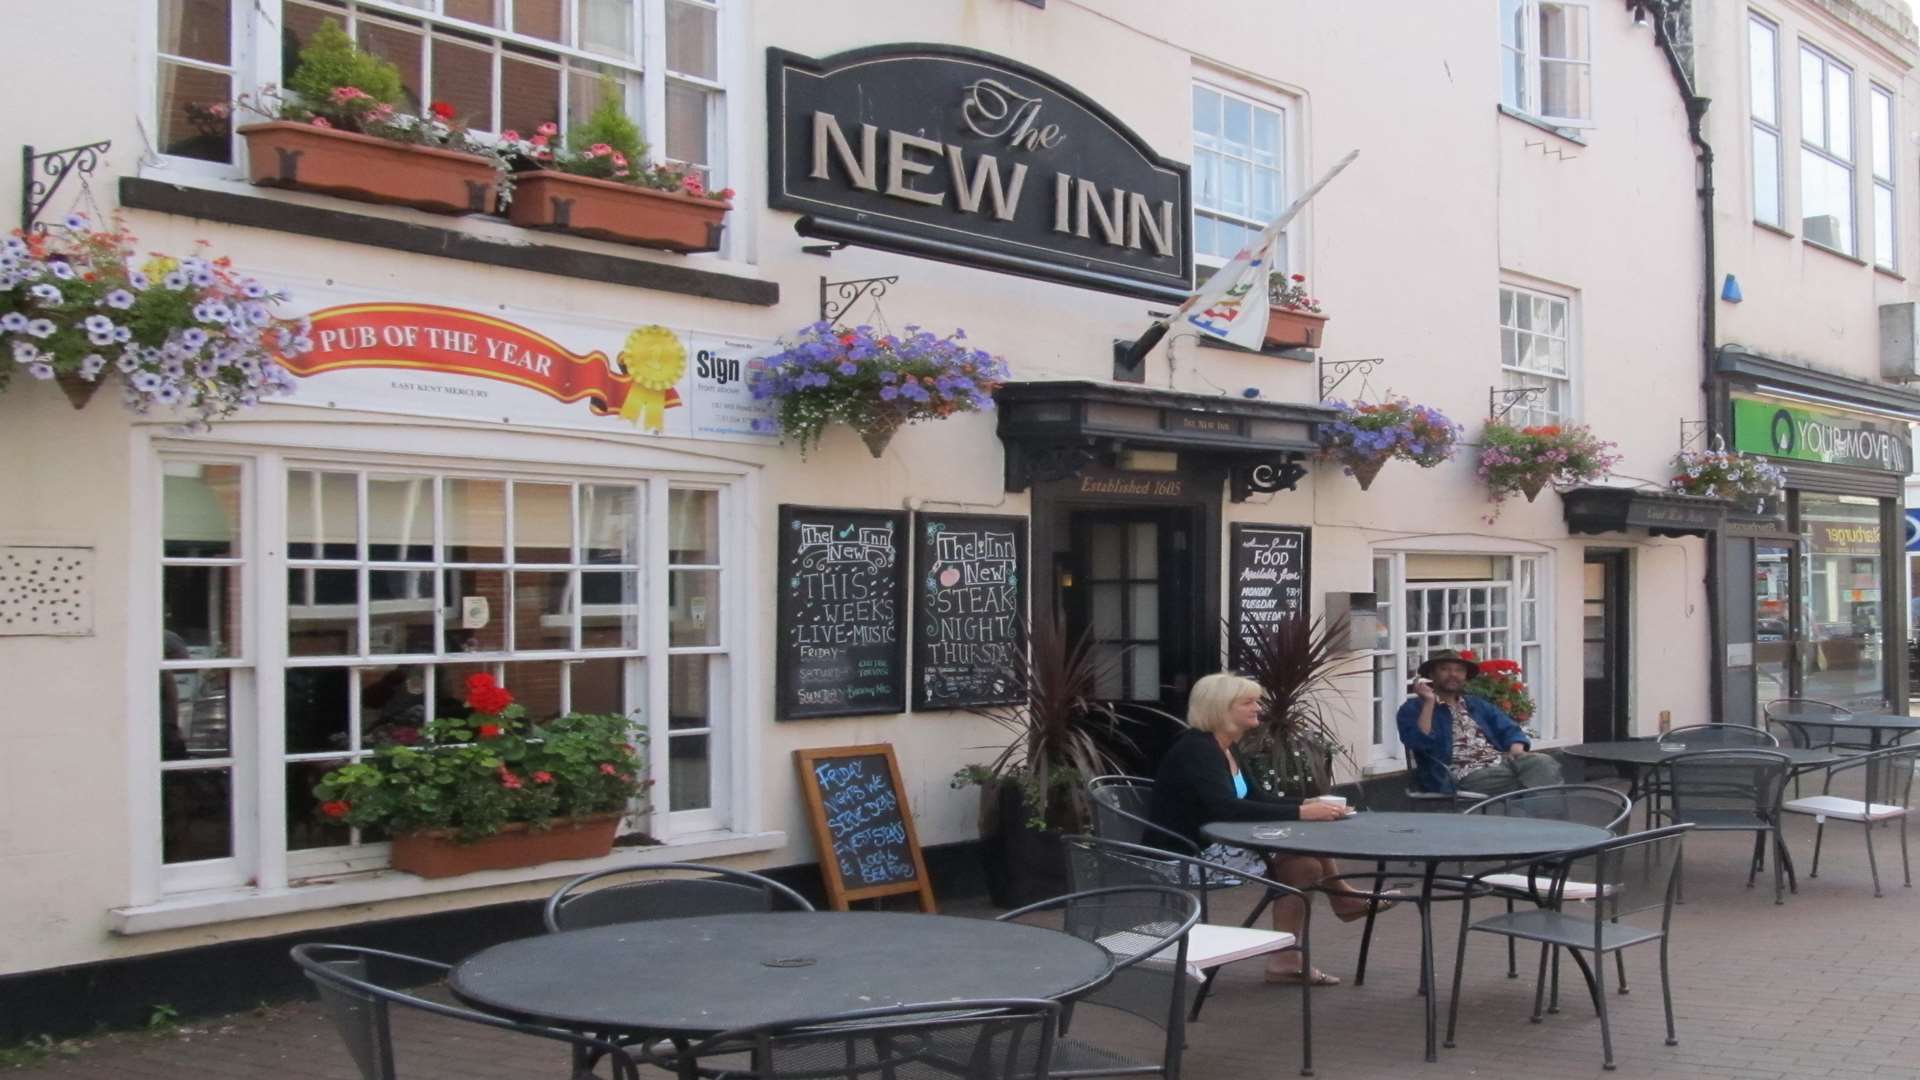 At least 10 people became ill after eating at the New Inn in September 2016